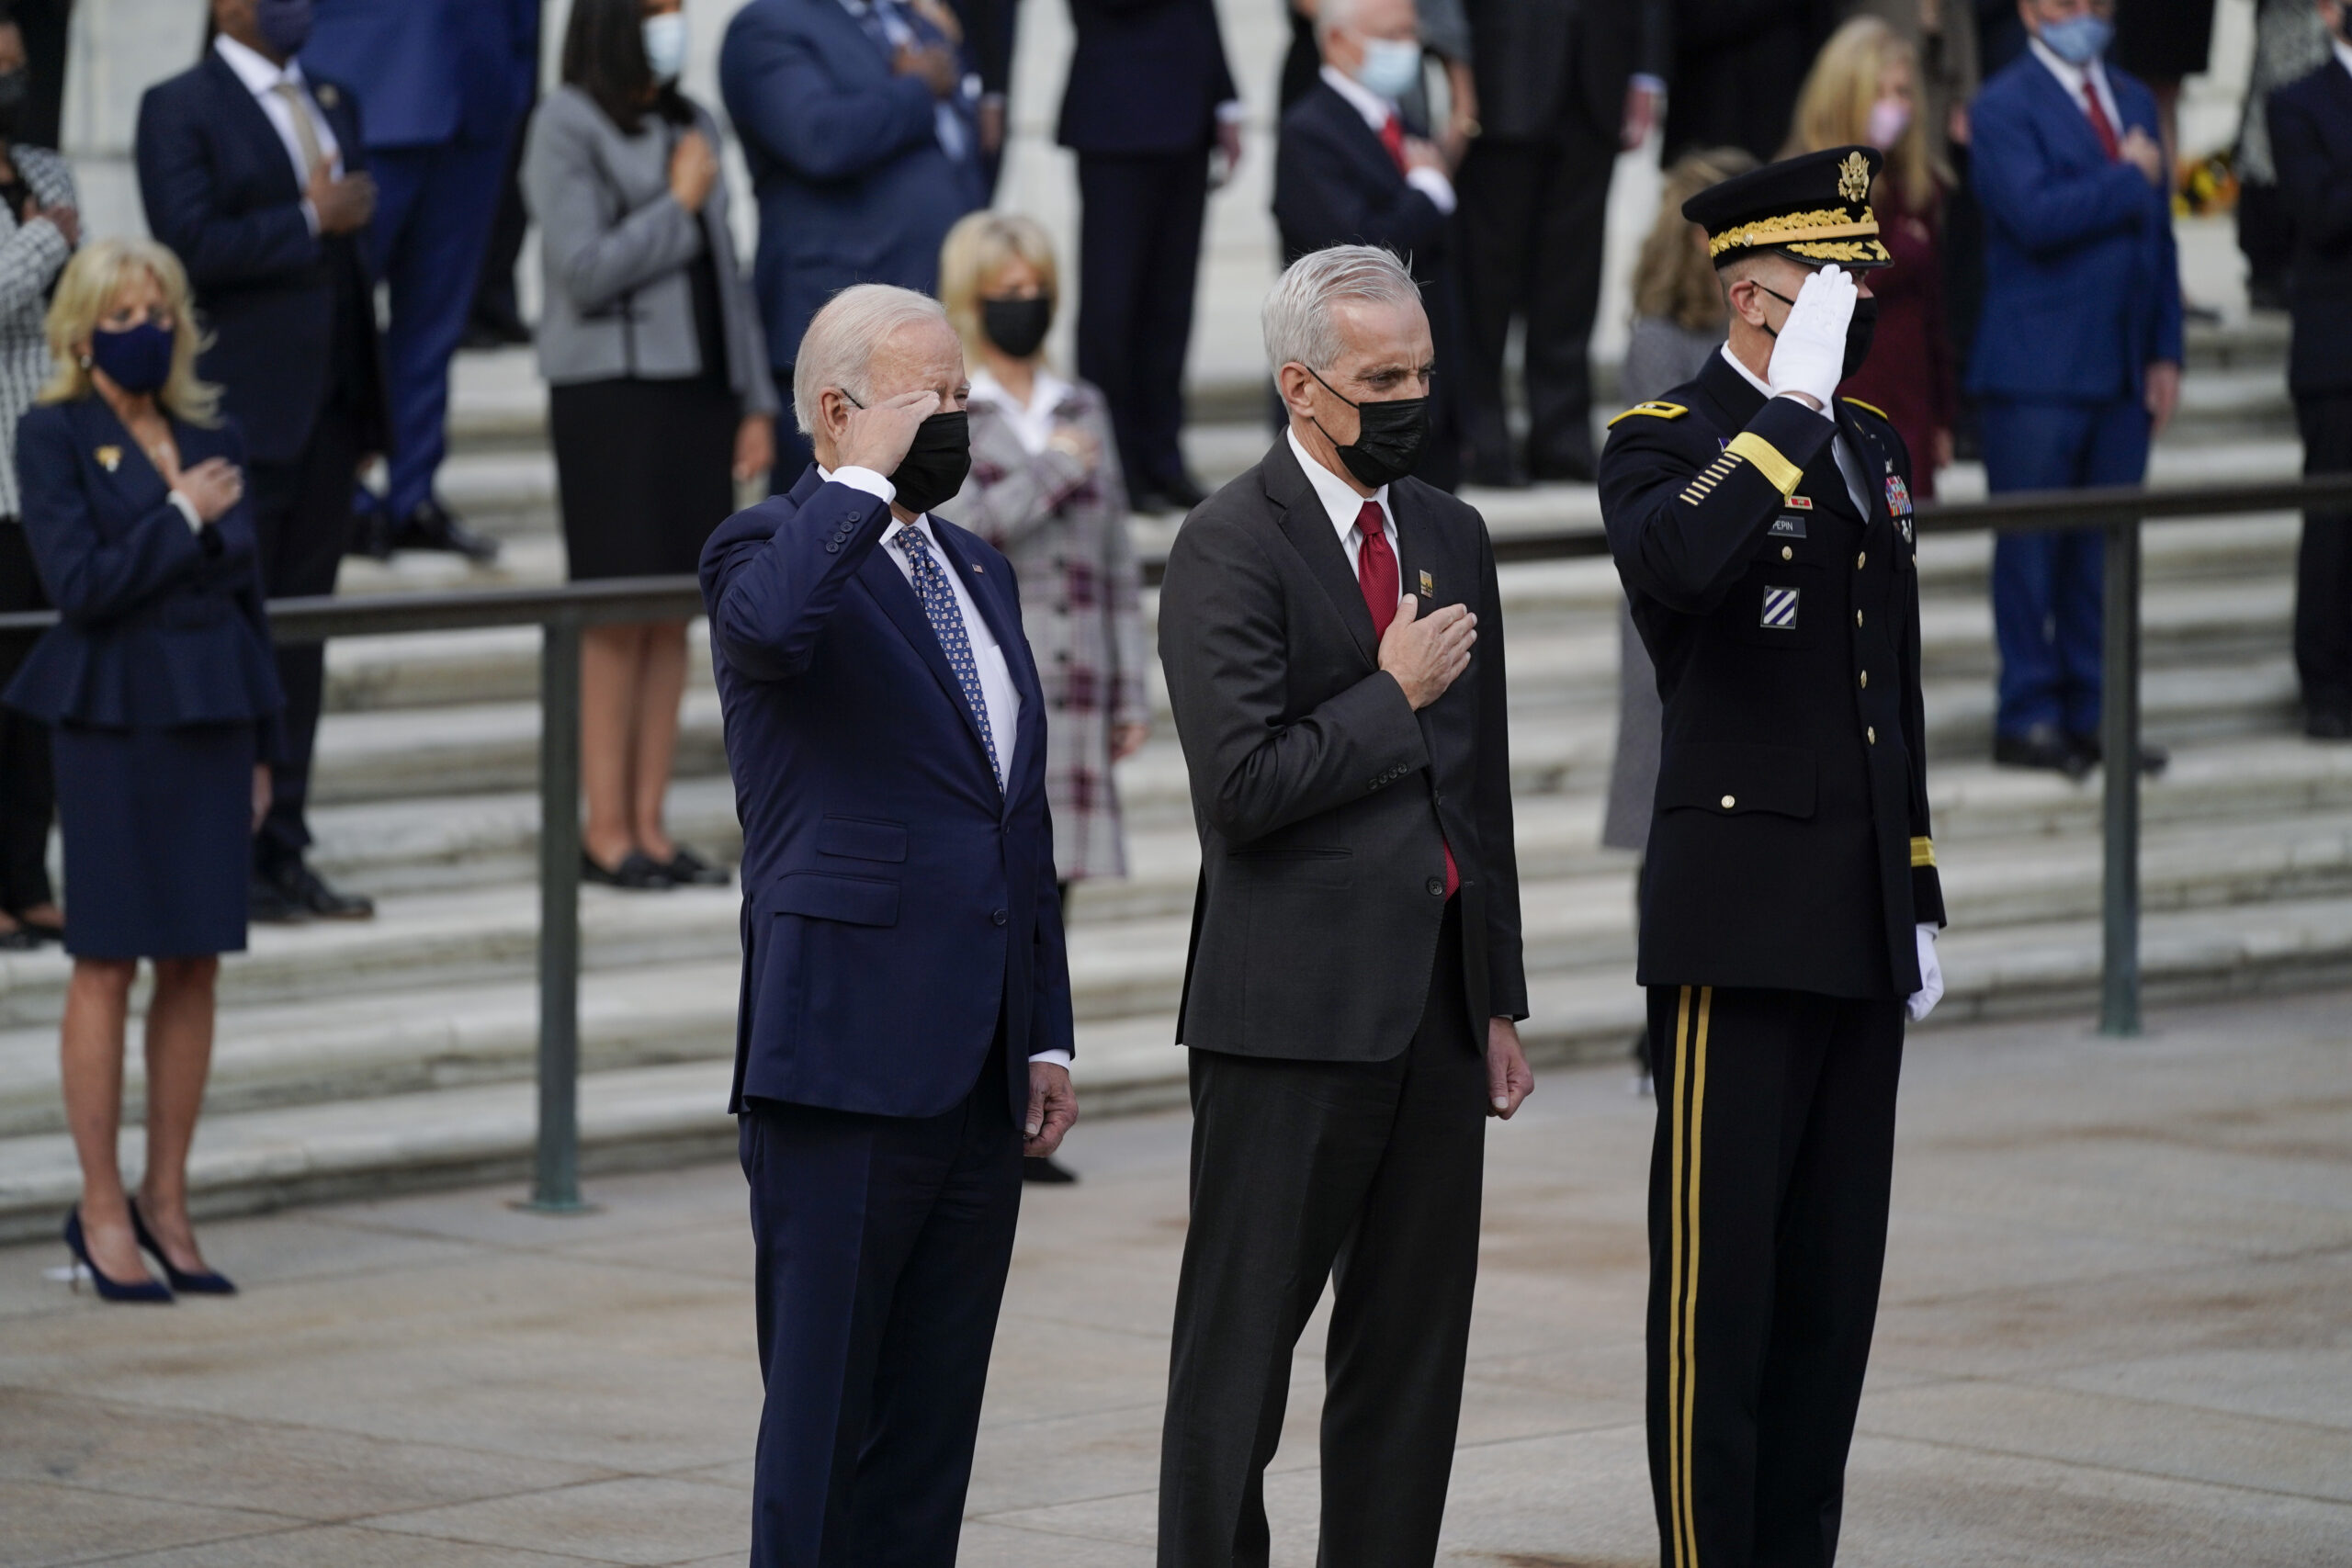 President Joe Biden salutes as he stands with Veterans Affairs Secretary Denis McDonough and Army Maj. Gen. Allan M. Pepin during a wreath laying ceremony to commemorate Veterans Day and mark the centennial anniversary of the Tomb of the Unknown Soldier at Arlington National Cemetery, Thursday, Nov. 11, 2021, in Arlington, Va. First lady Jill Biden is at left. (AP Photo/Evan Vucci)